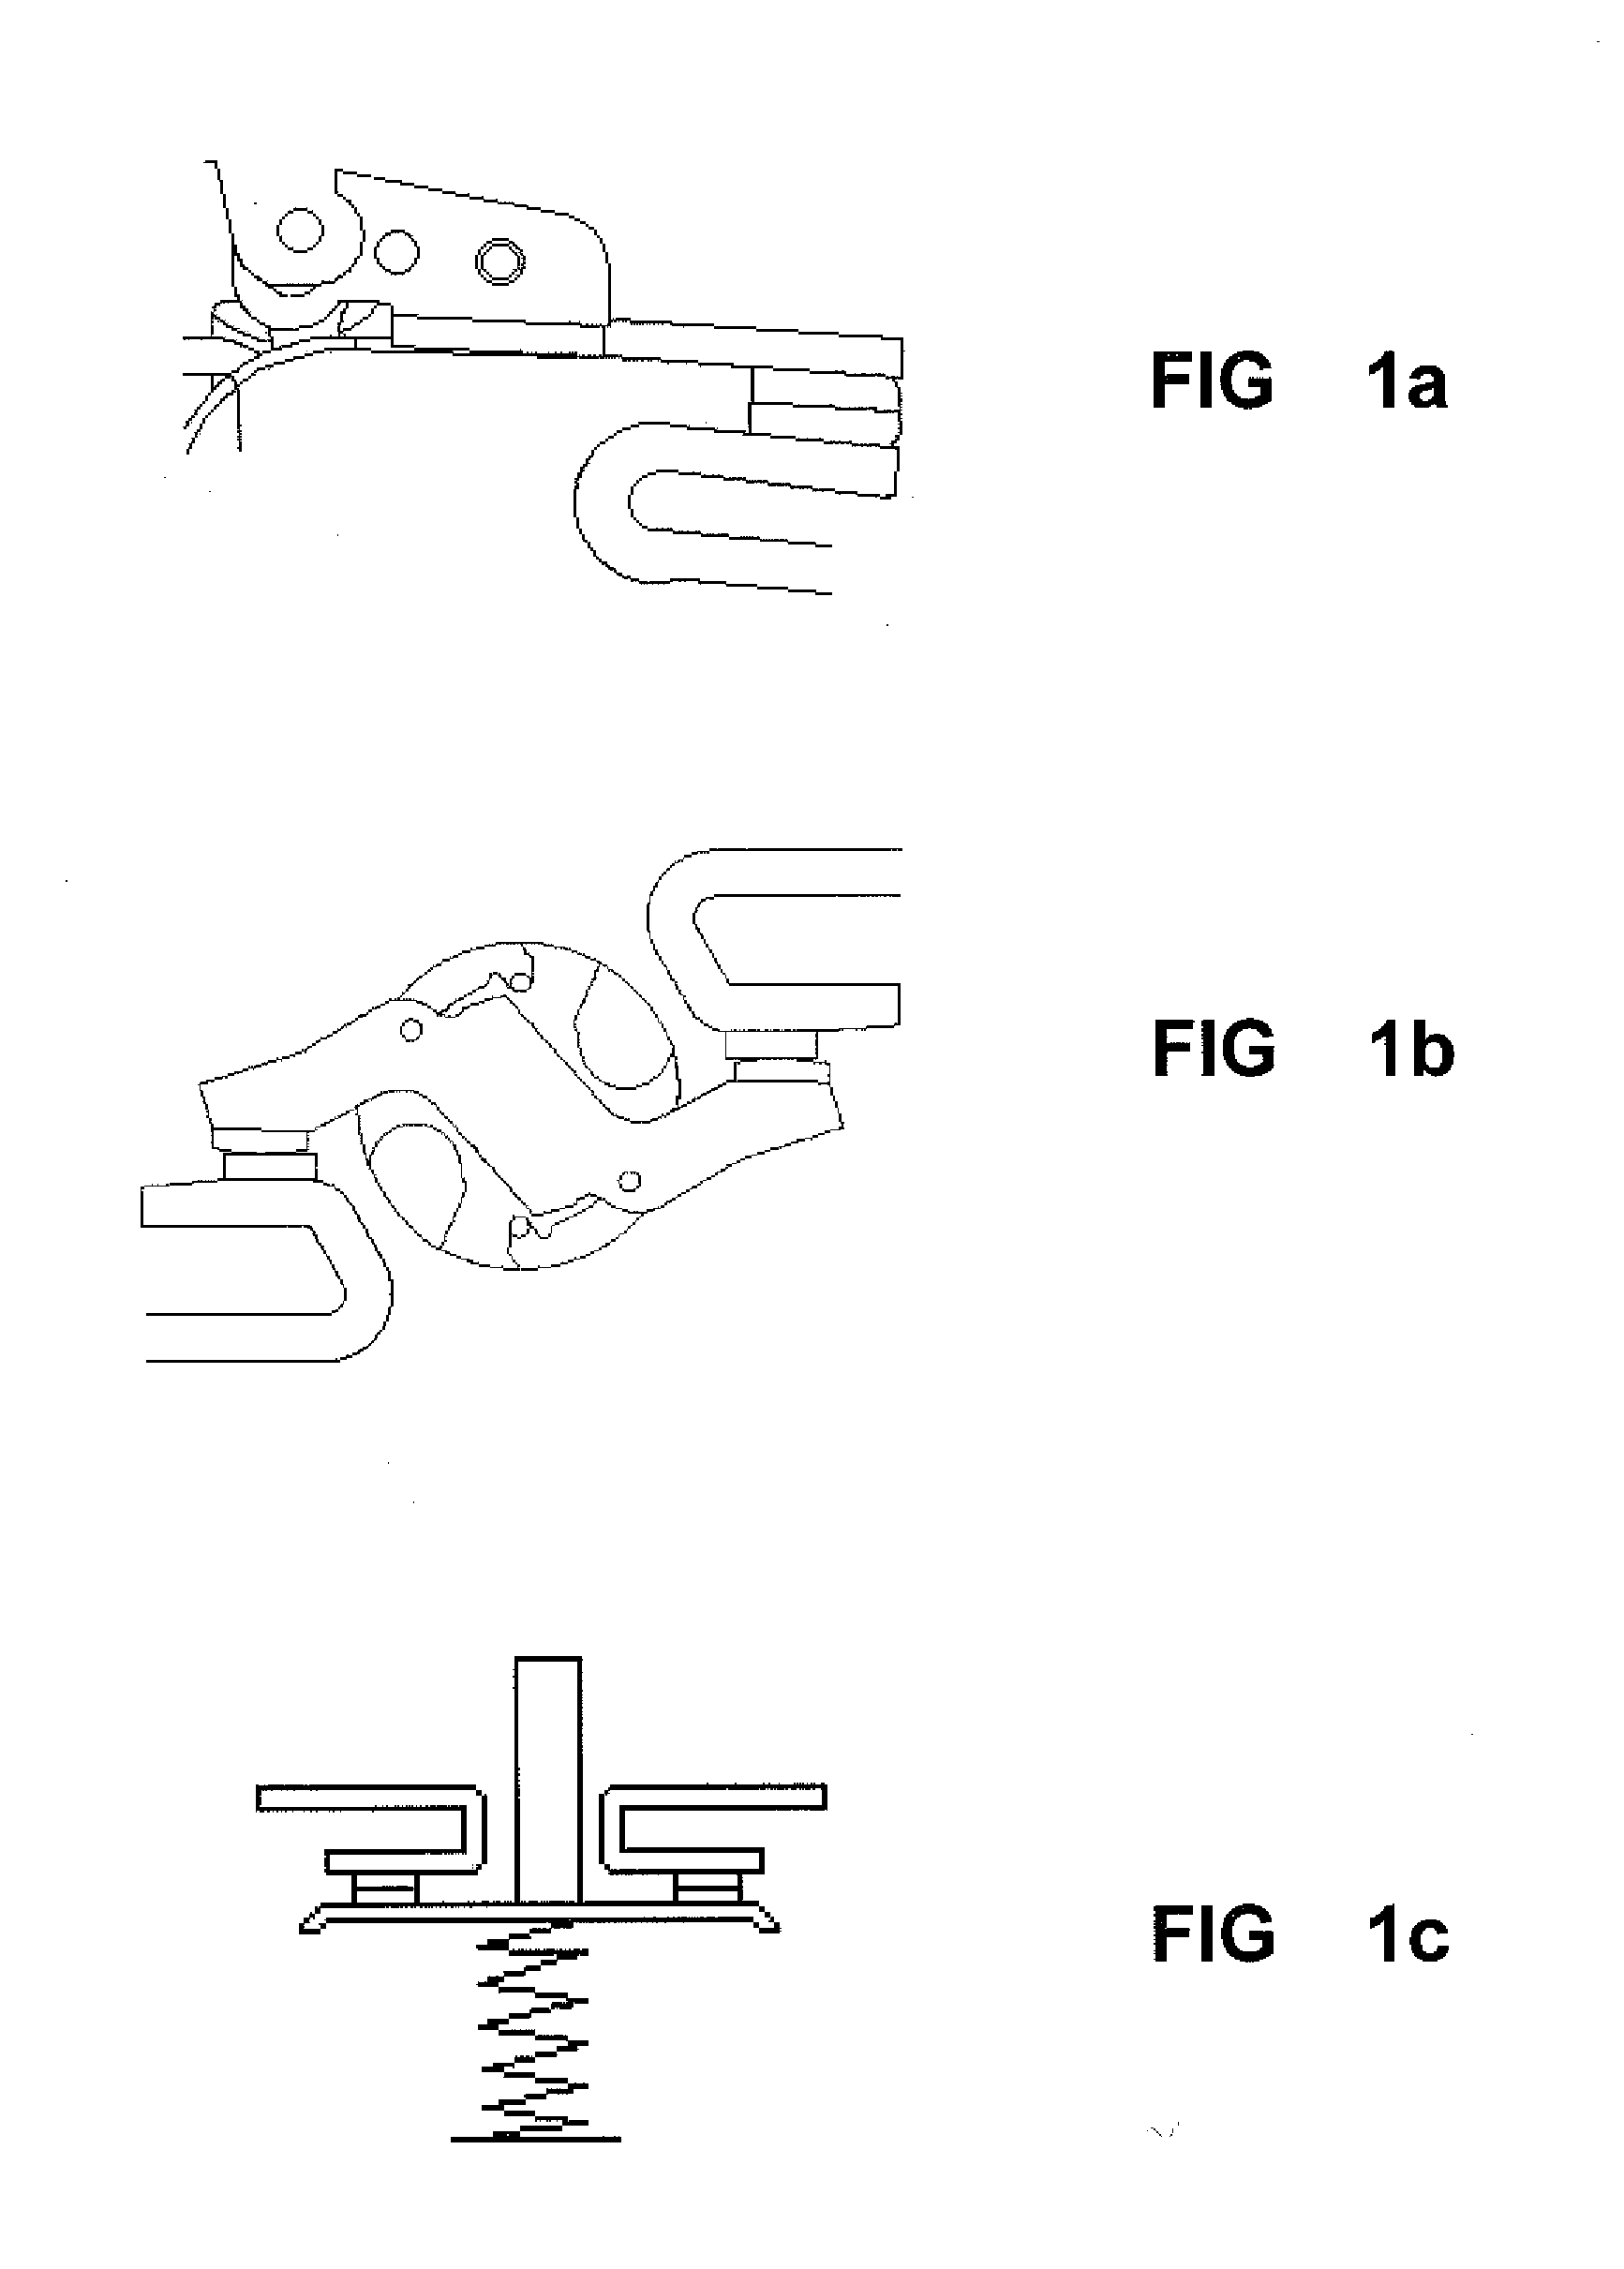 Contact structure of low-voltage electrical apparatus